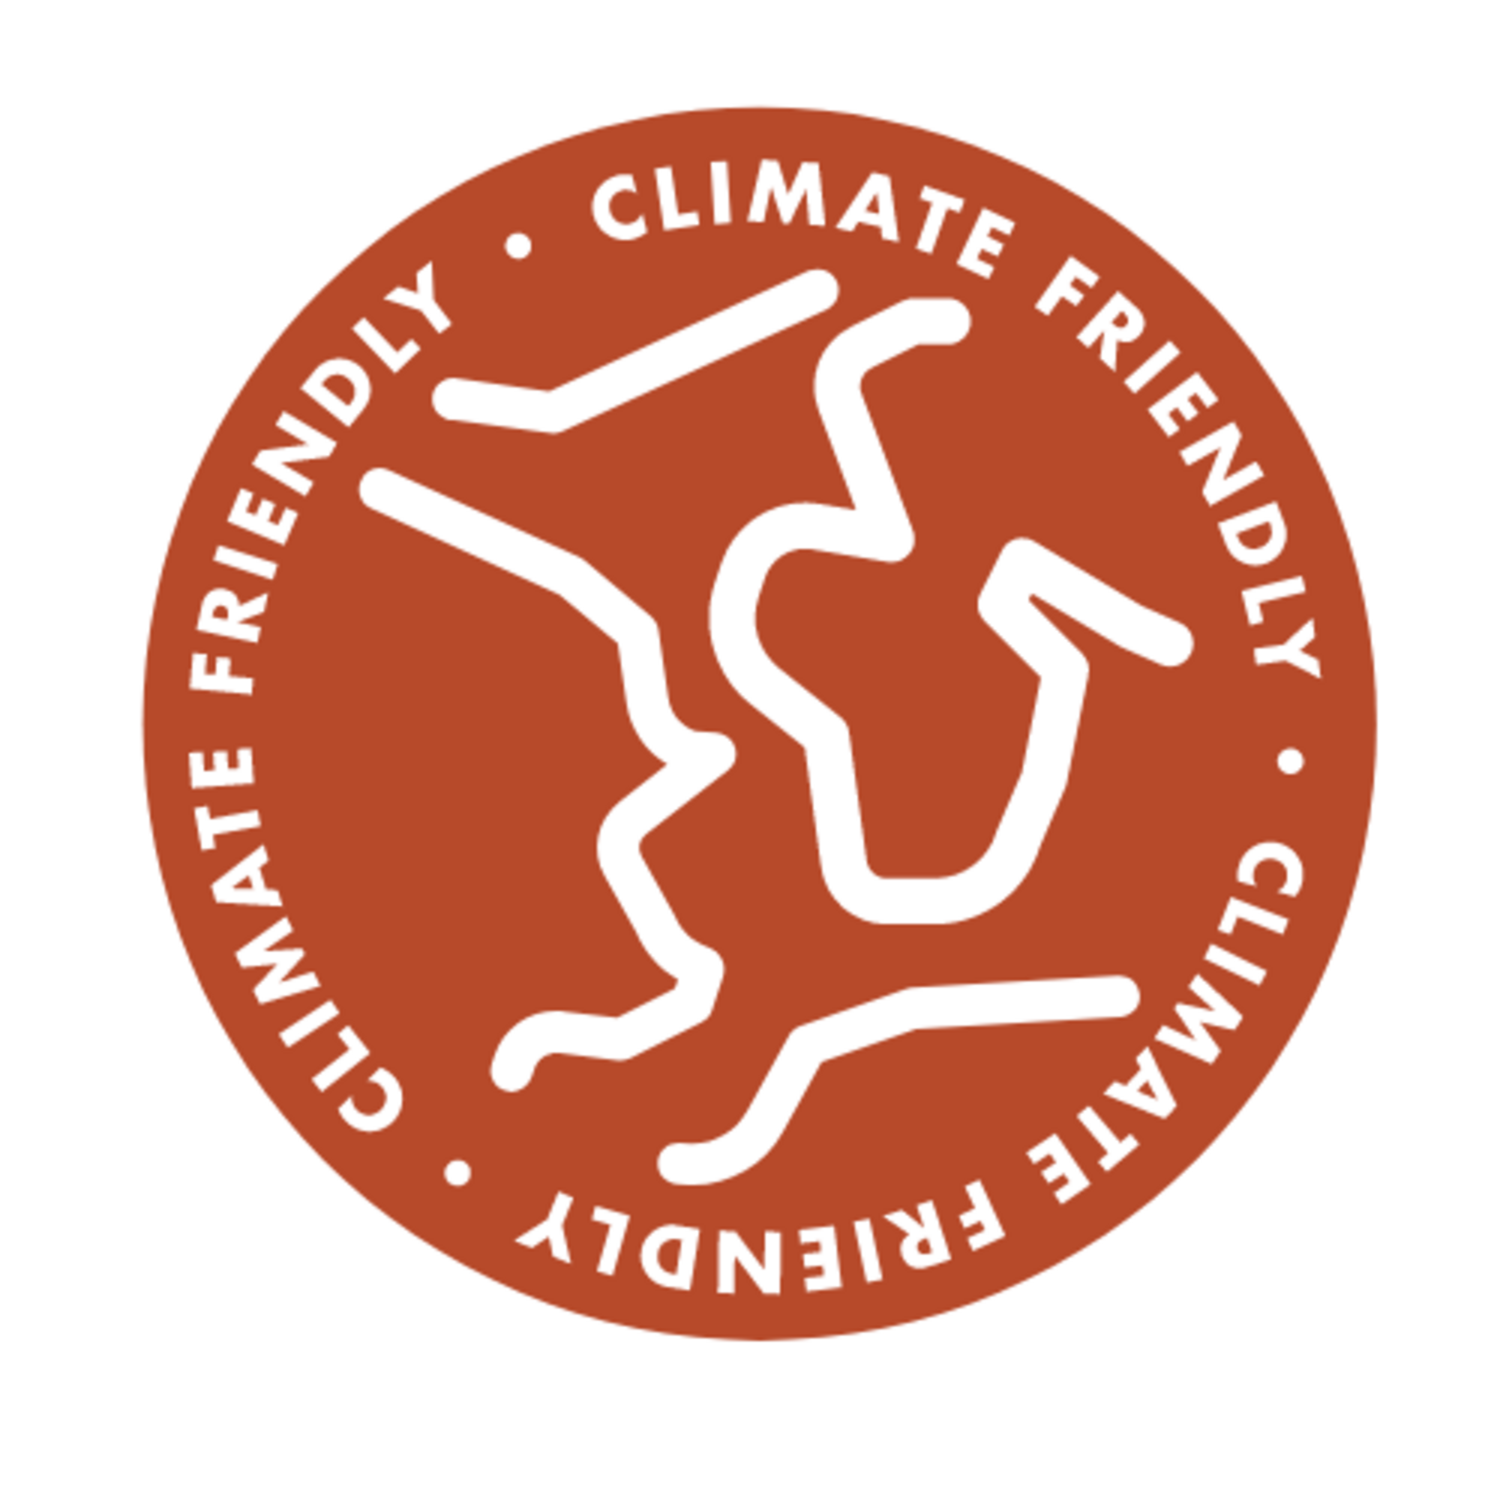 Climate Friendly badge